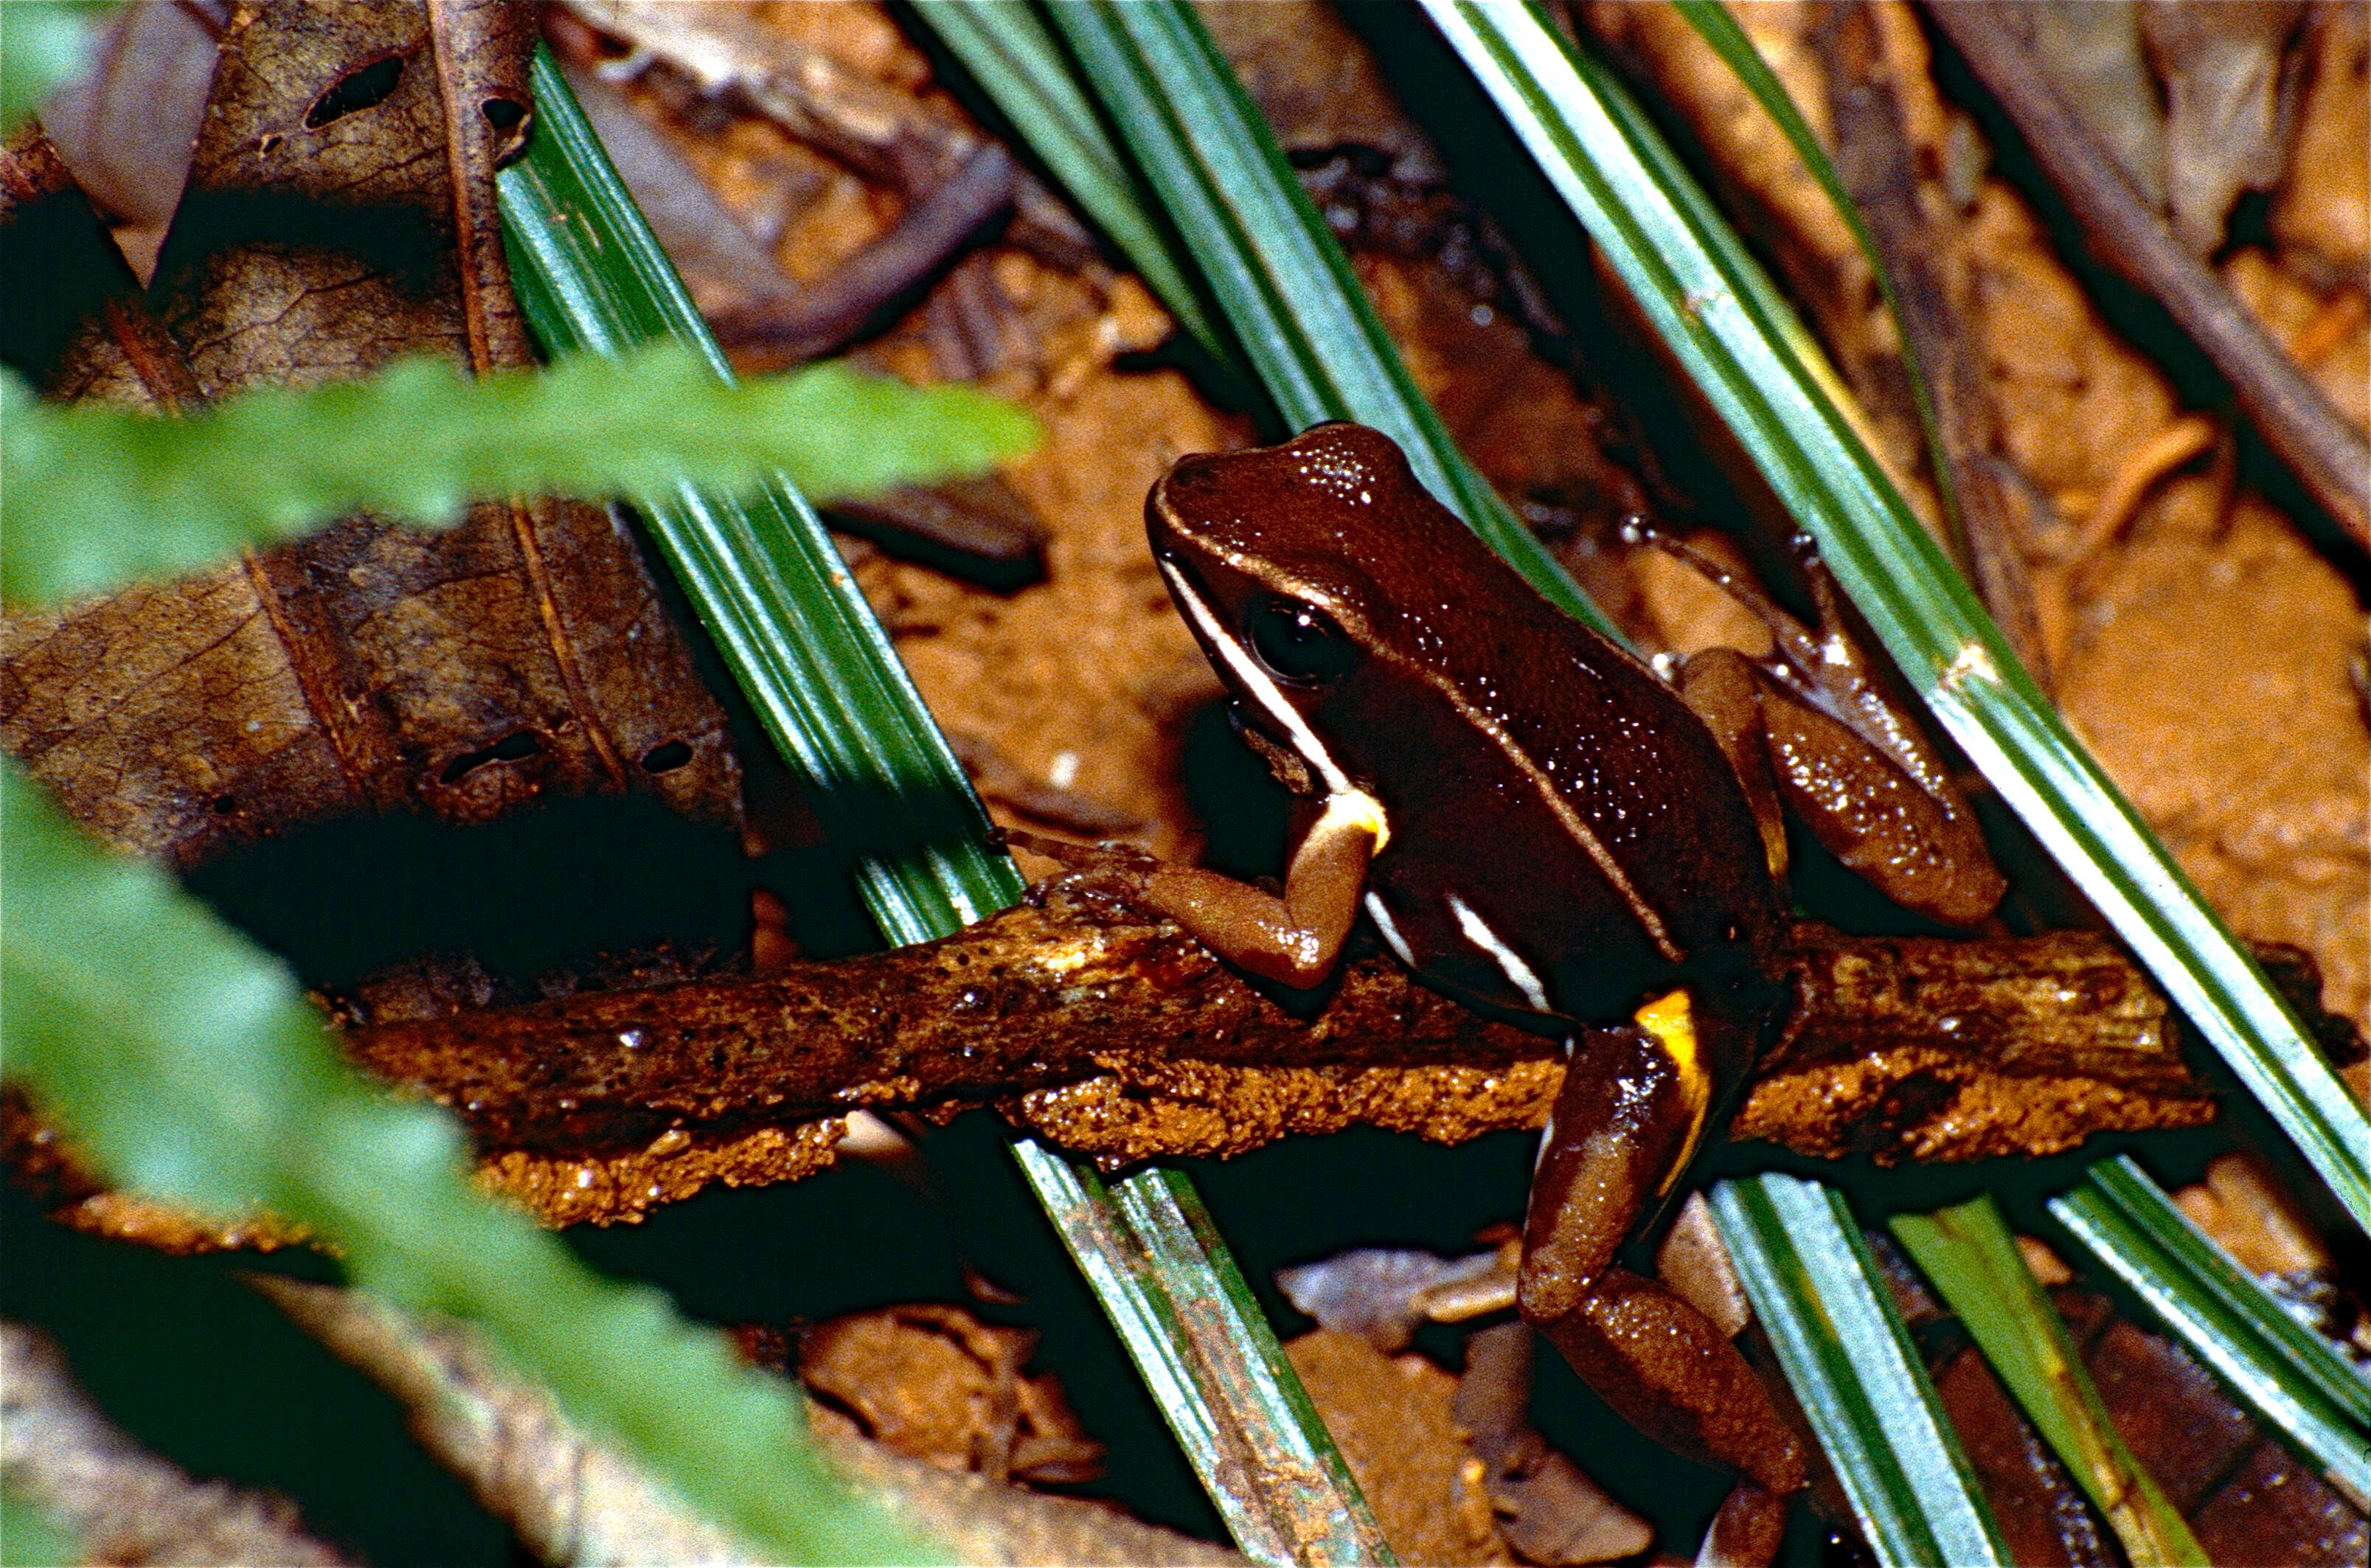 Image of Brilliant-thighed Poison Frog